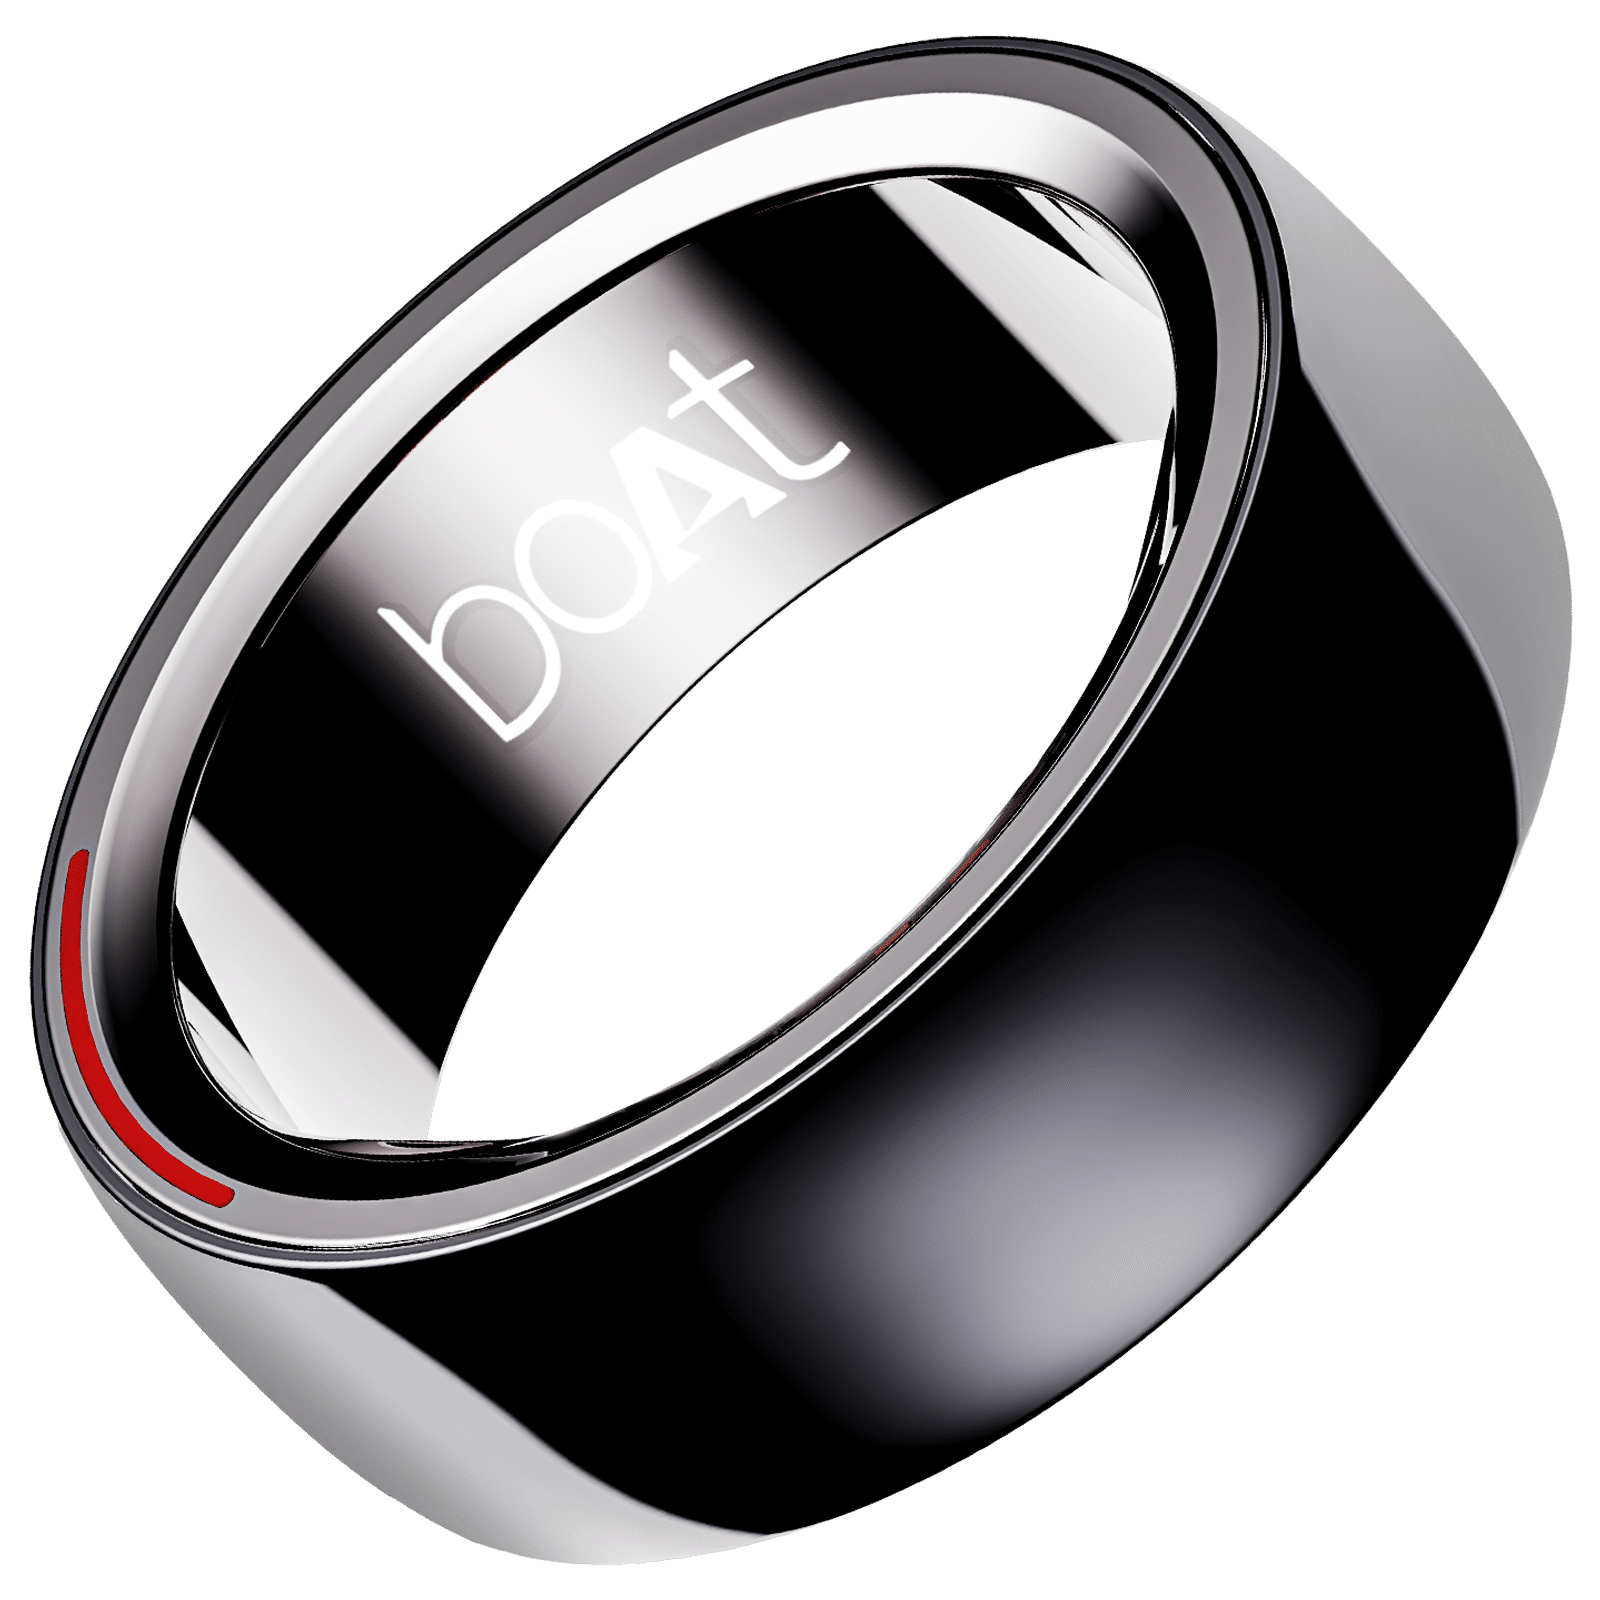 Buy boAt Gen 1 S9 Smart Ring with Activity Tracker (5ATM Water